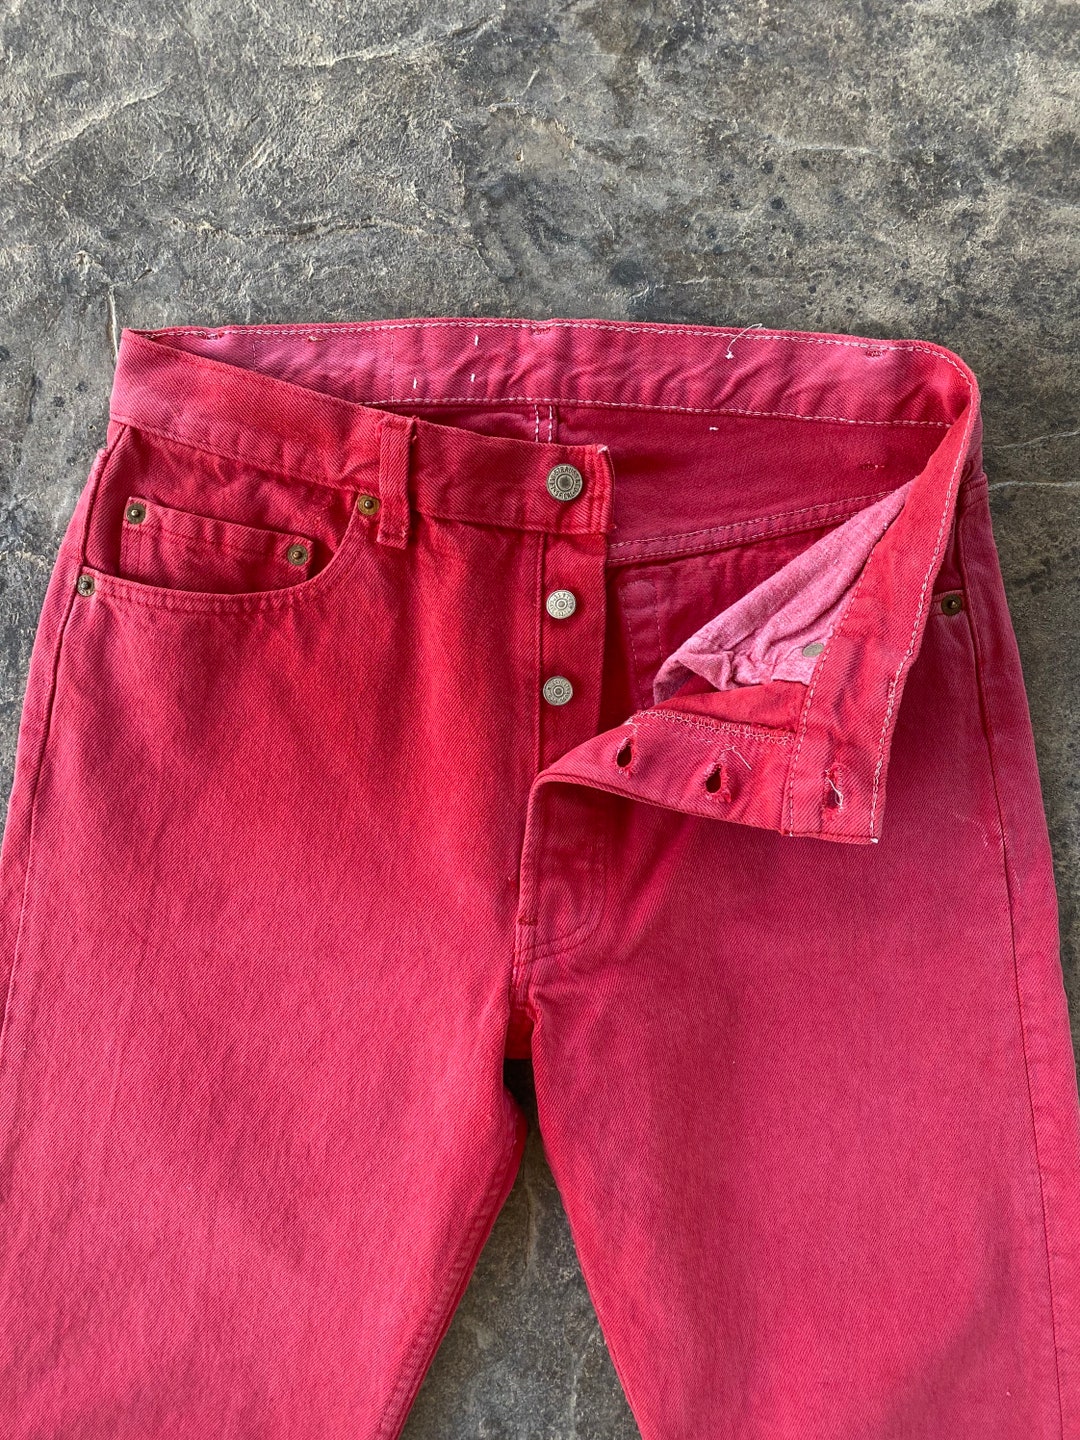 80s Levis 501 Jeans Nicely Worn Red Vintage 32 X 31 - Etsy